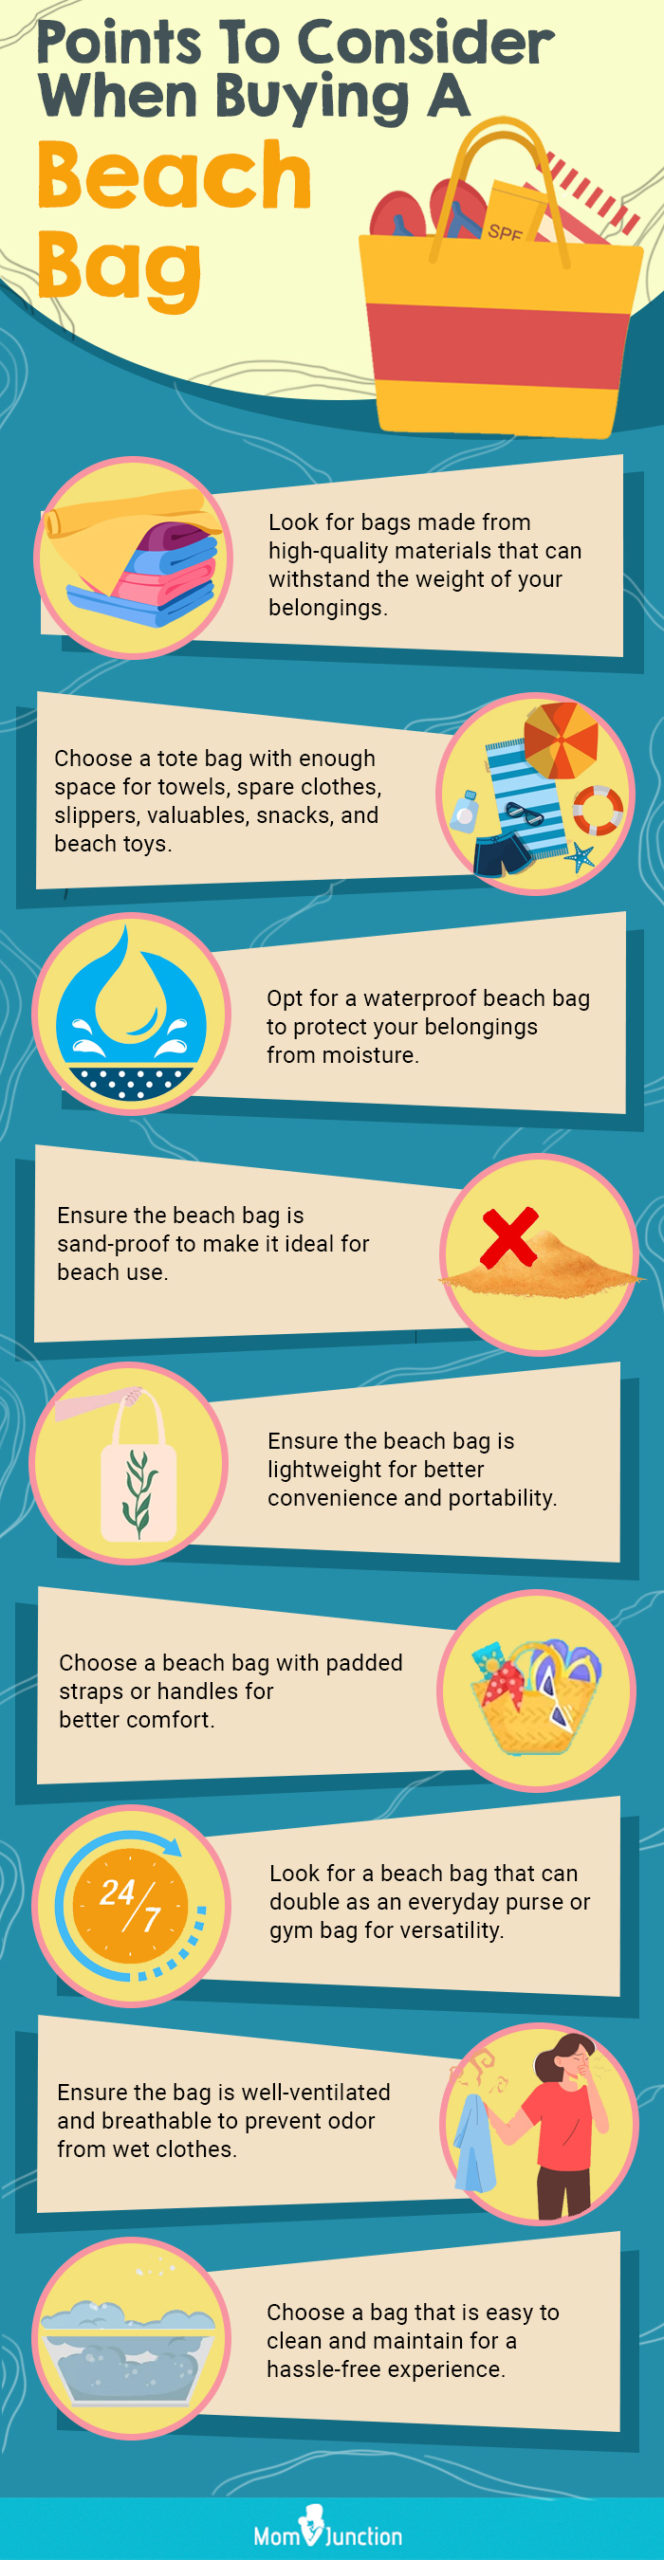 Points To Consider When Buying A Beach Bag (infographic)